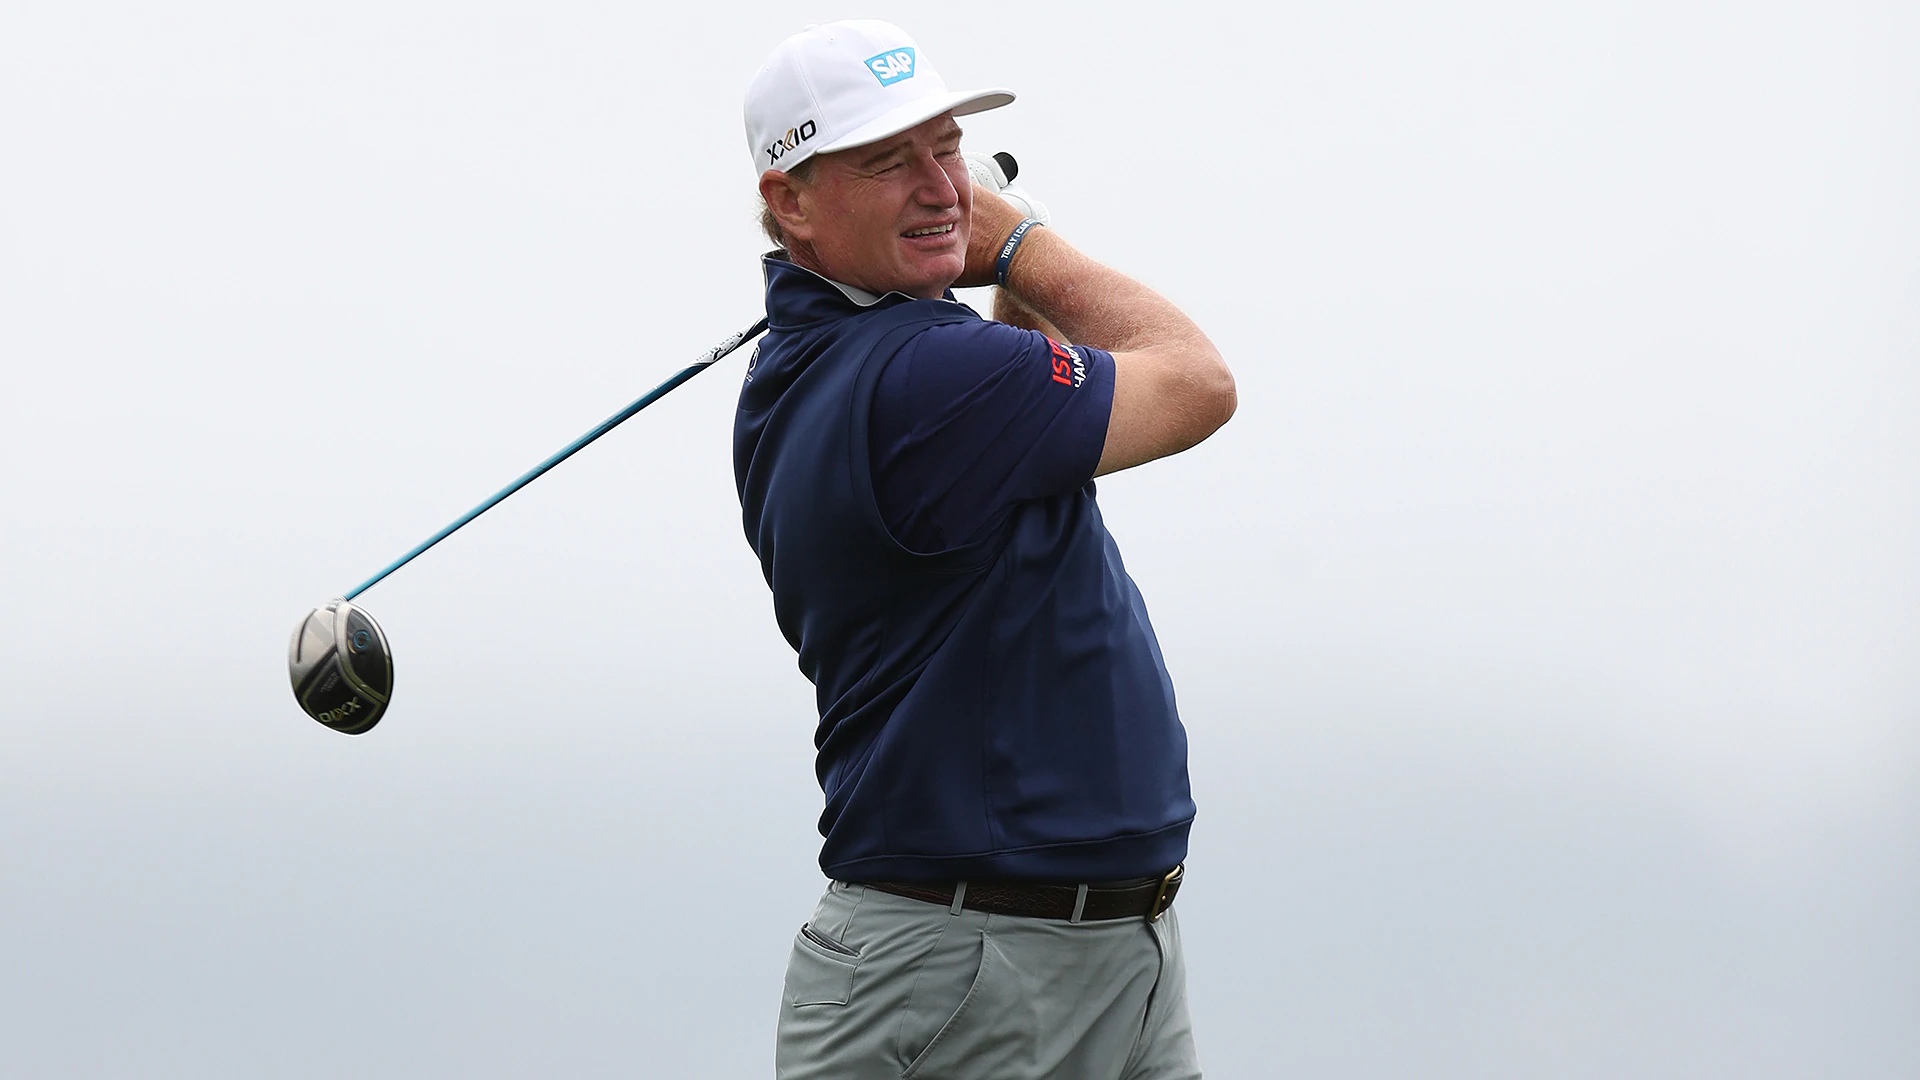 Ernie Els grabs lead at Pebble Beach with Furyk, Couples, Goosen two back